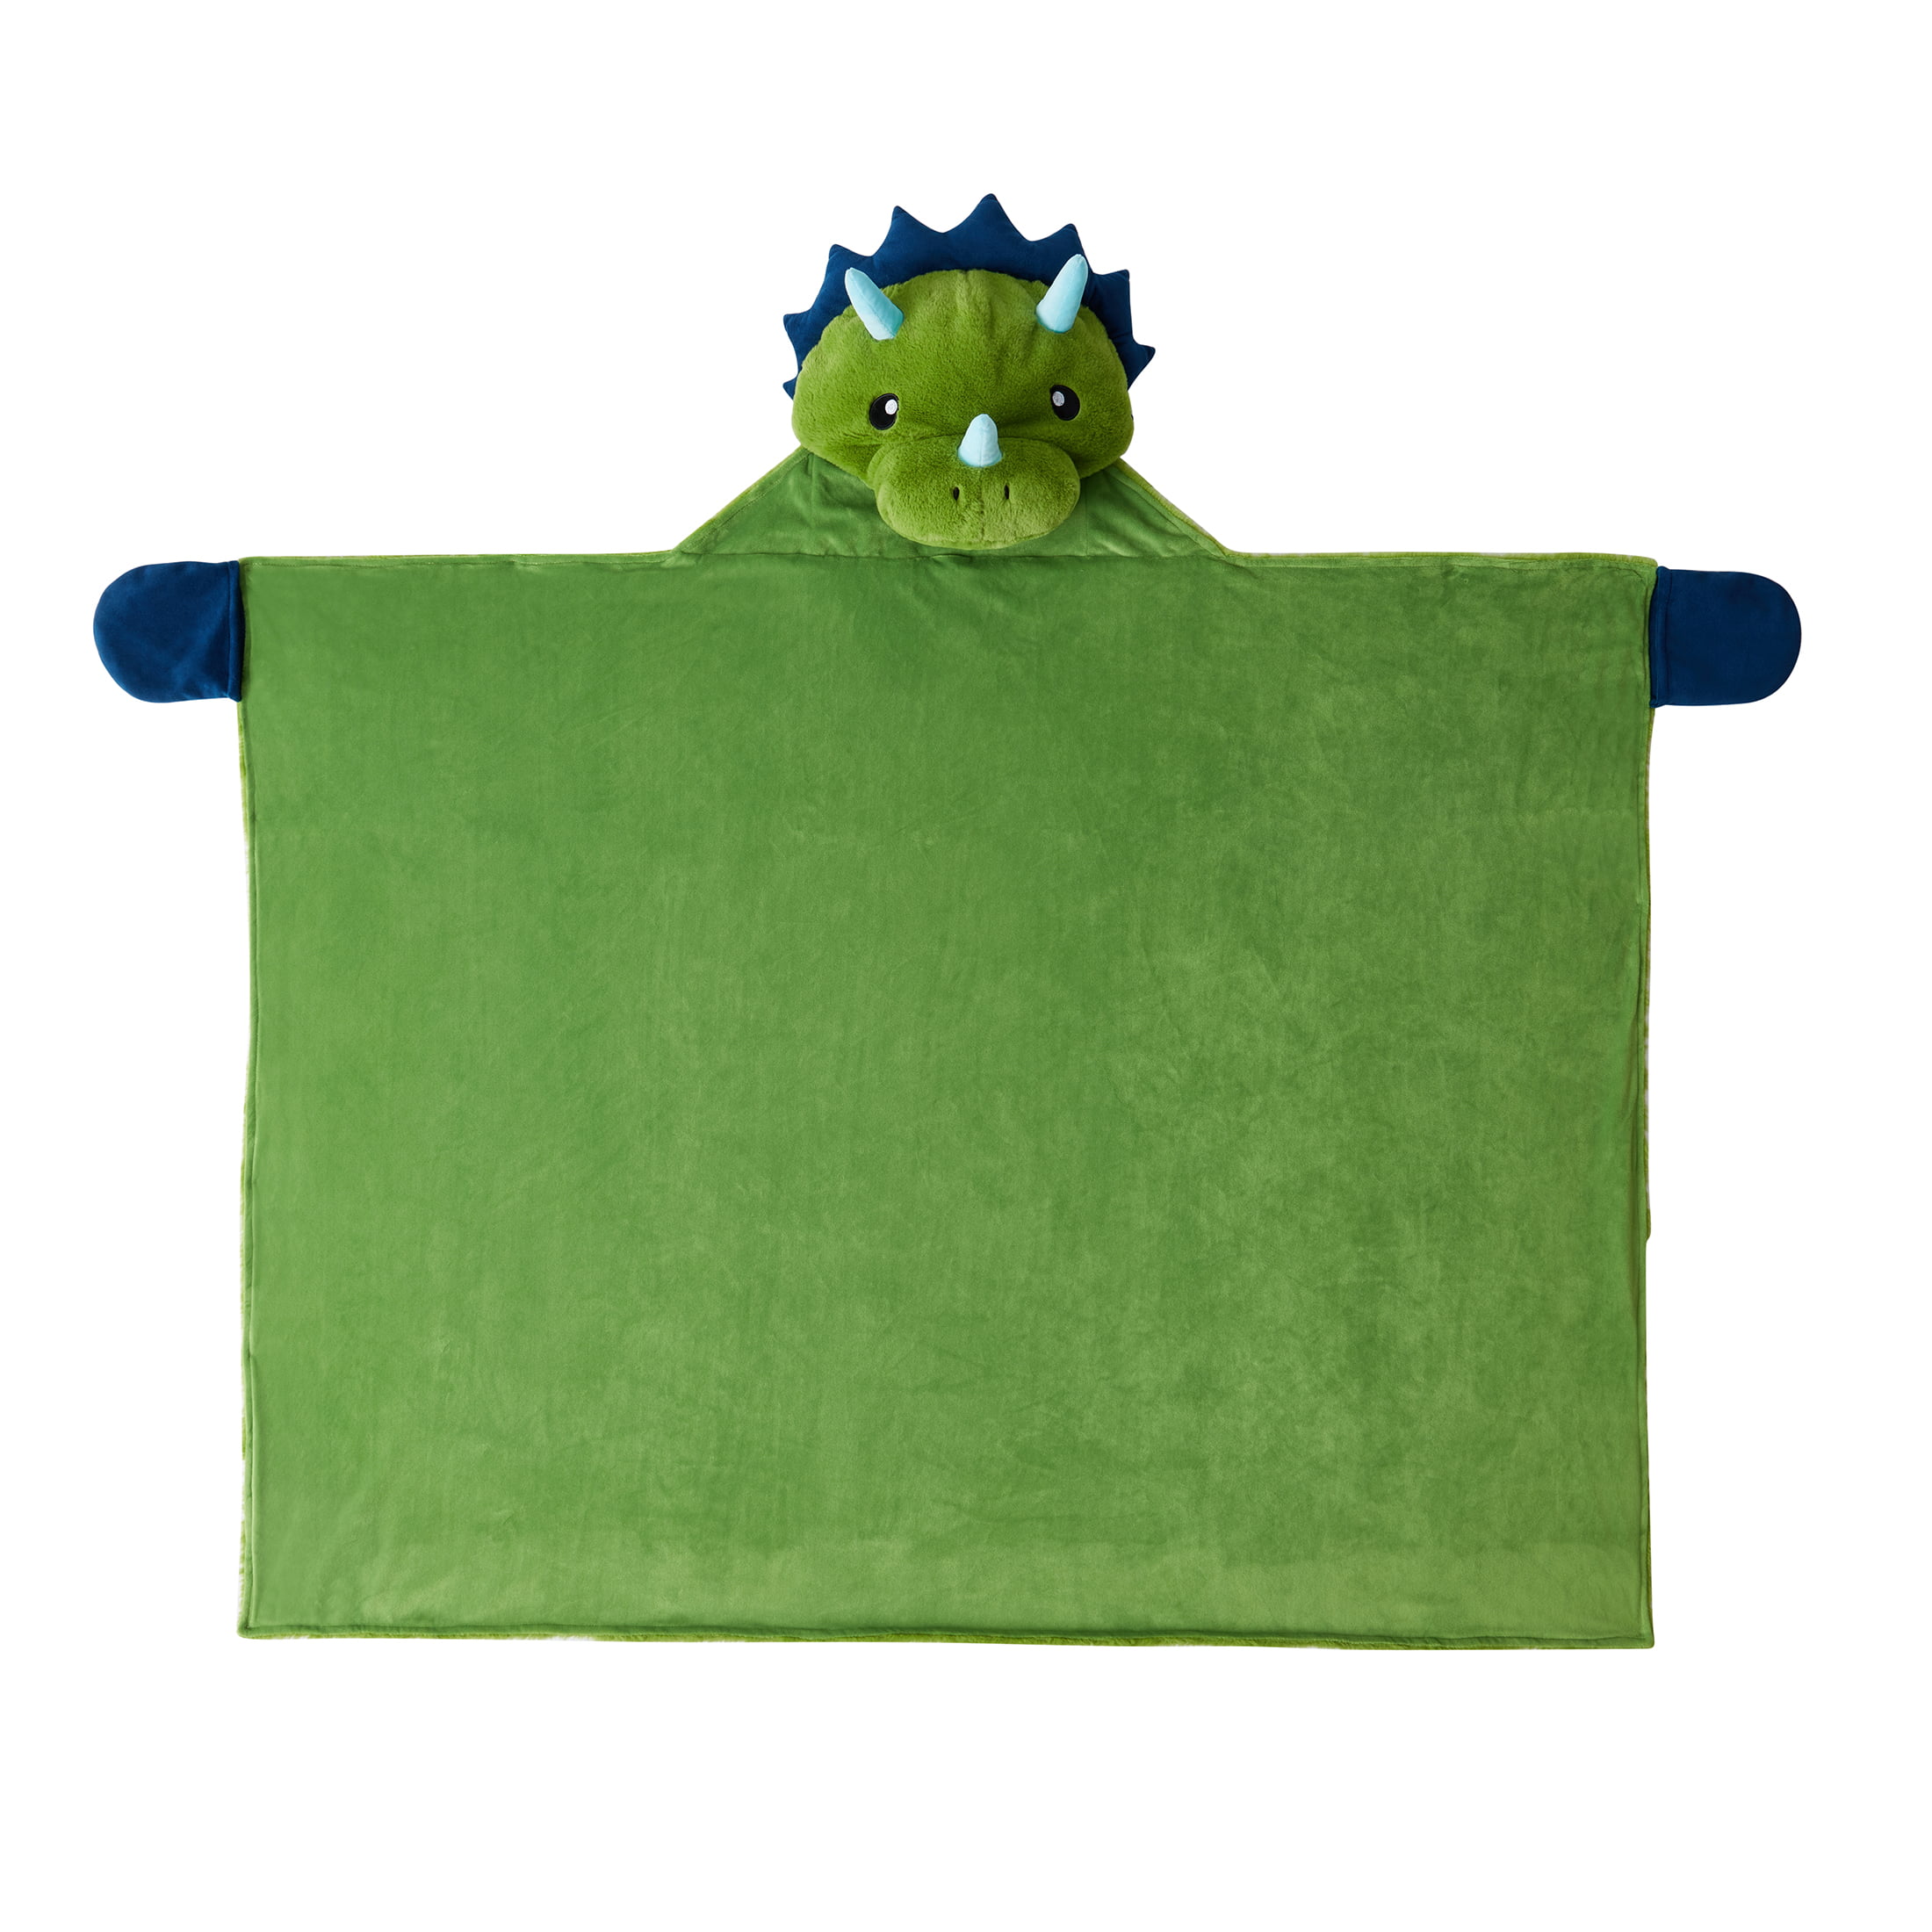 New Hooded Throw 40 x 50 Soft Touch Fox By Mainstay Kids 